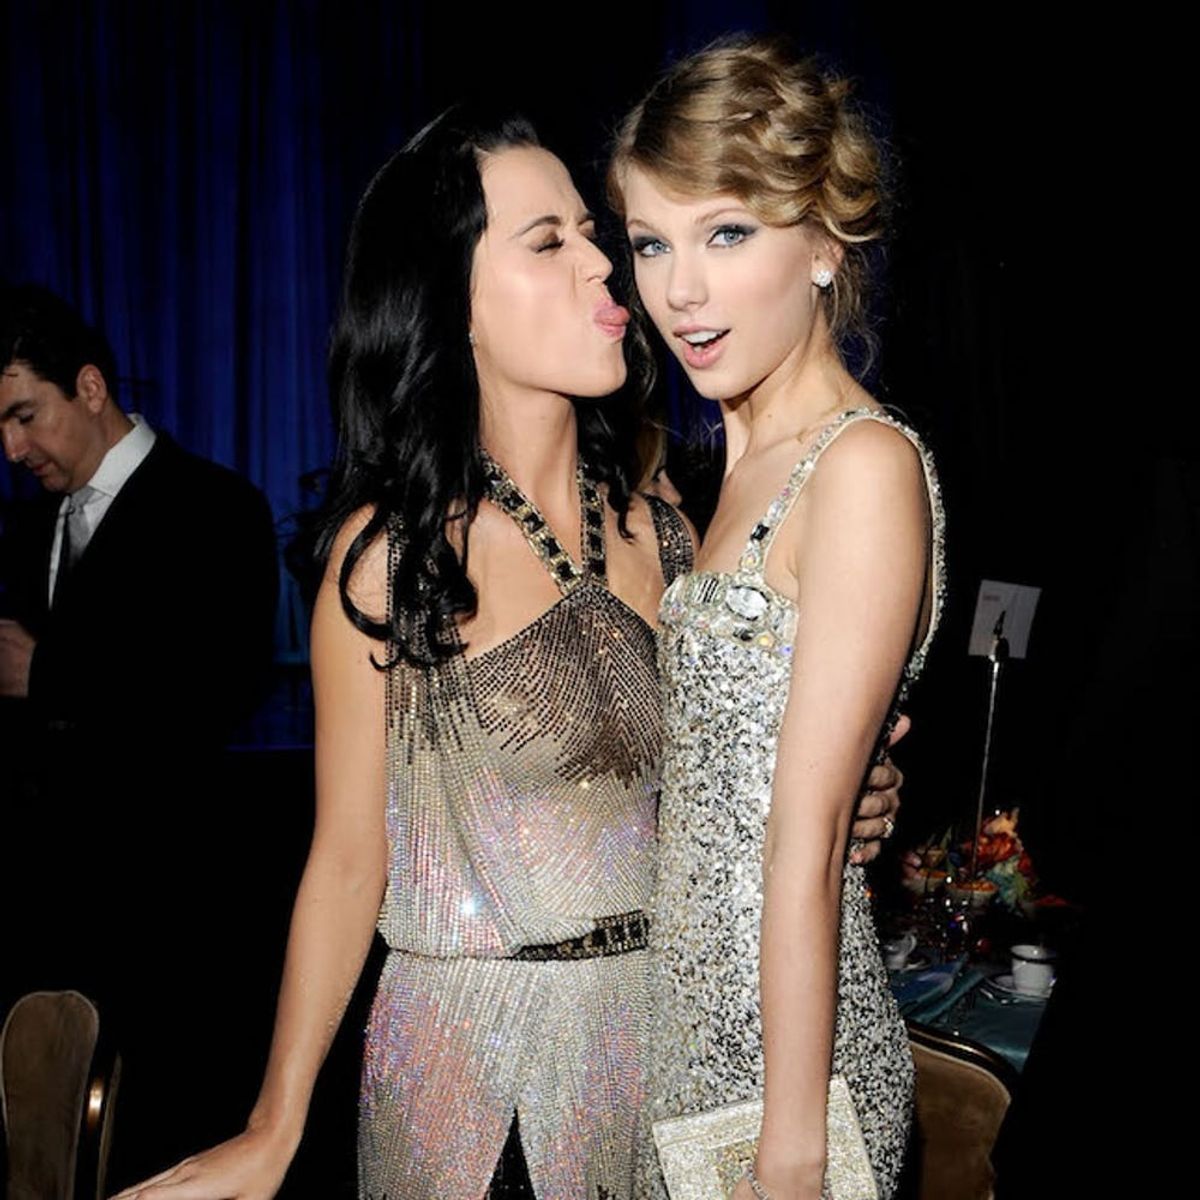 Katy Perry’s Reaction to Kim K + Taylor Swift’s Social Media War Is Totally Unexpected